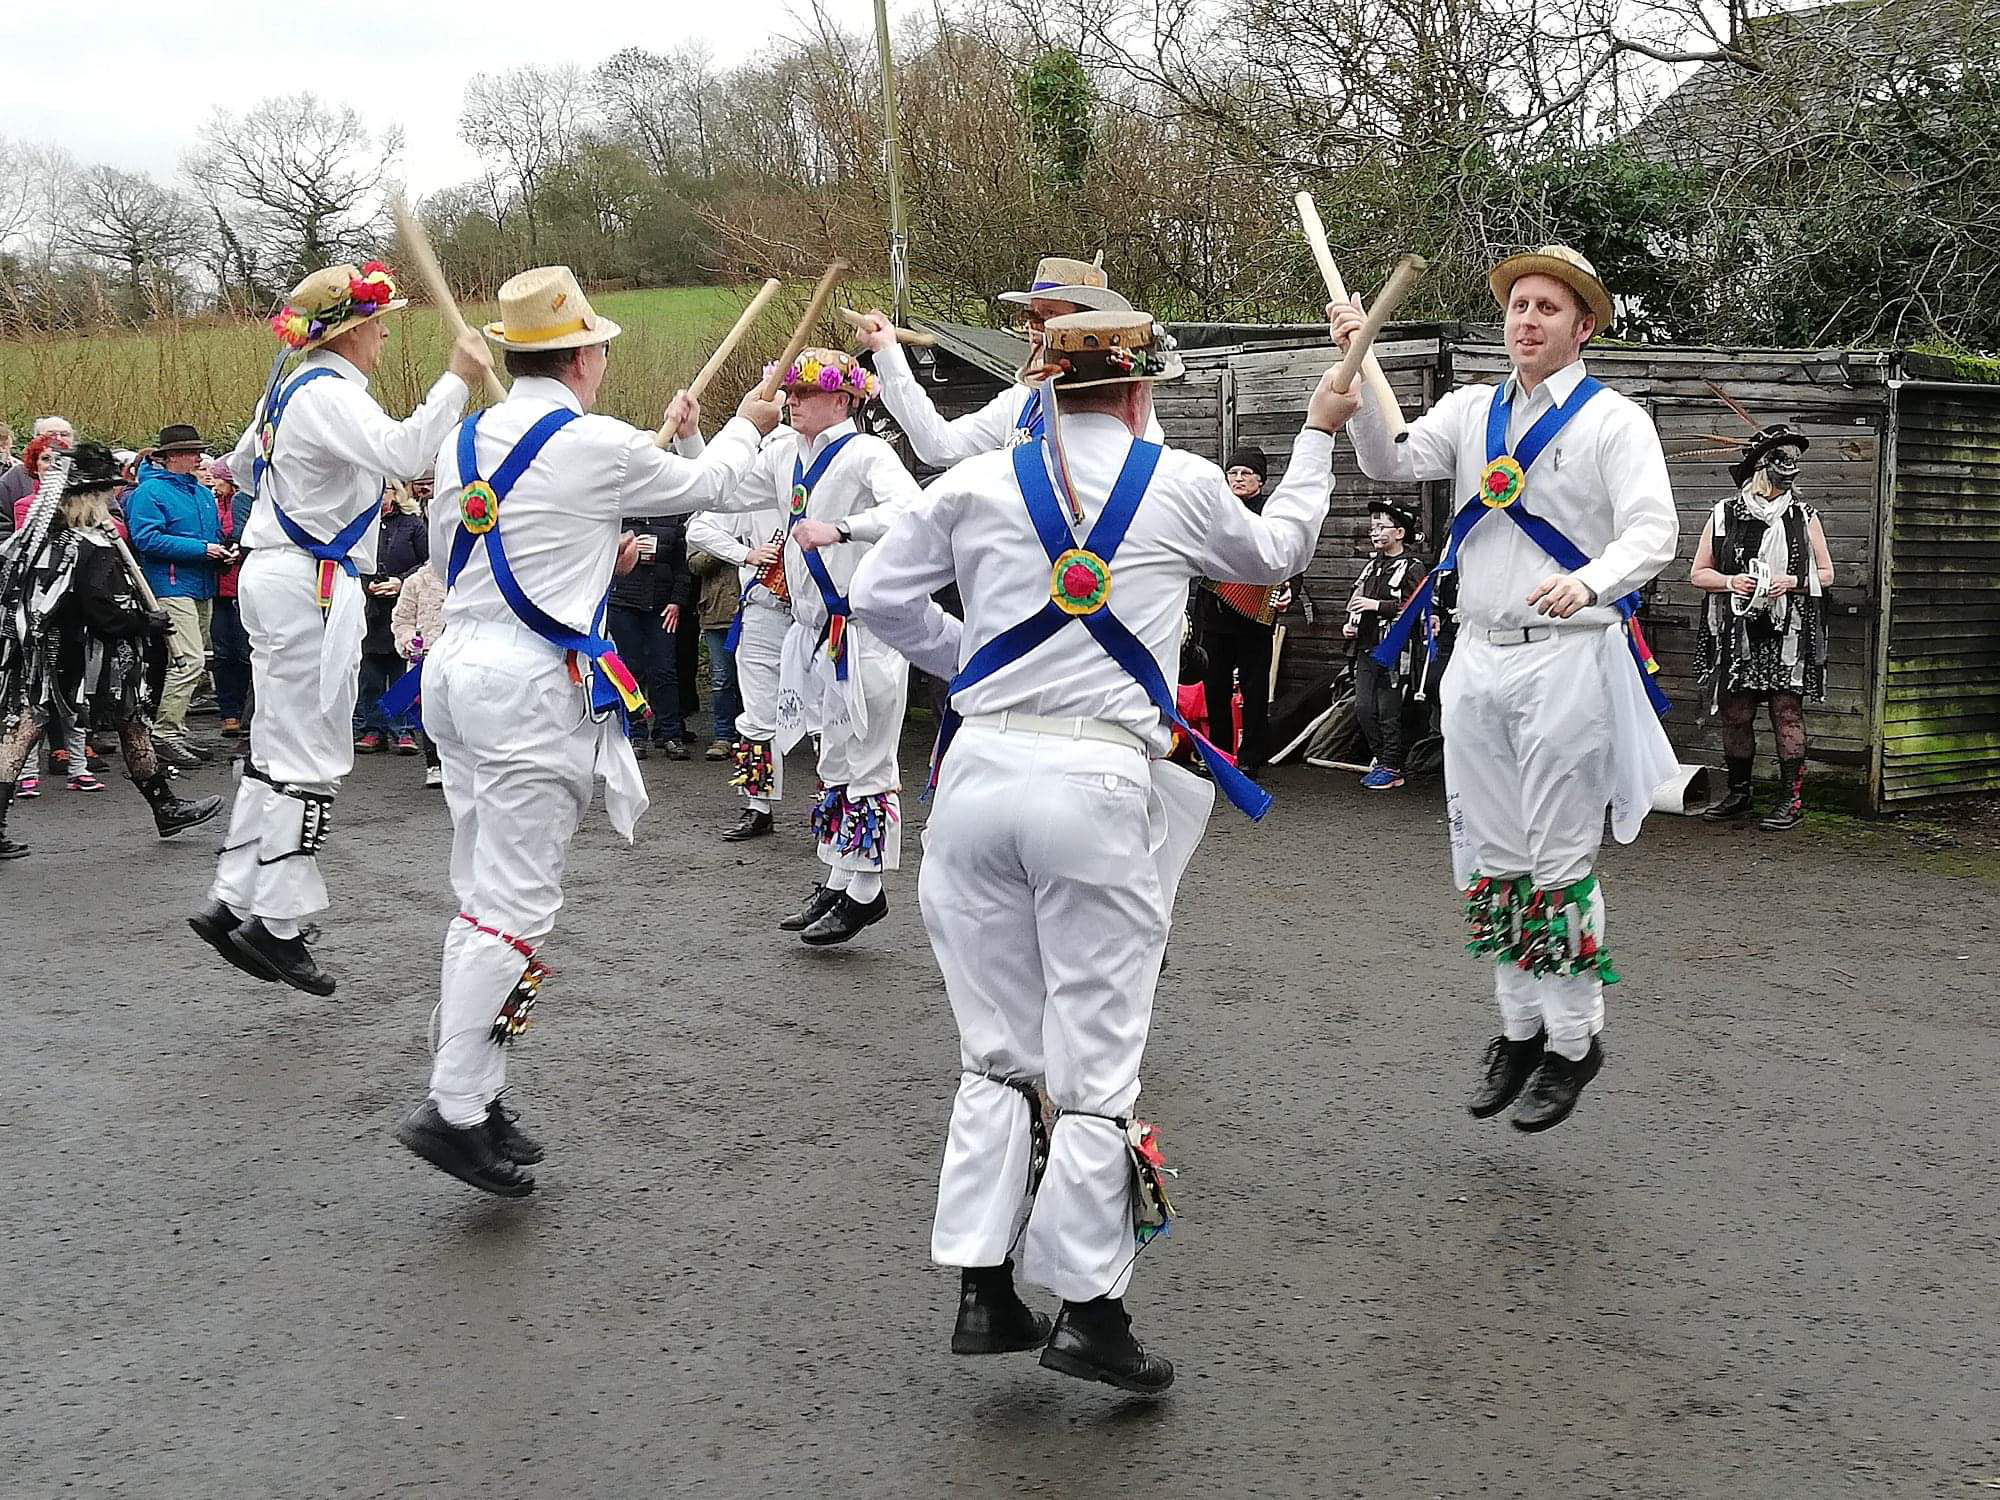 Dancing out with Alvechurch Morris Men - 1st January 2019